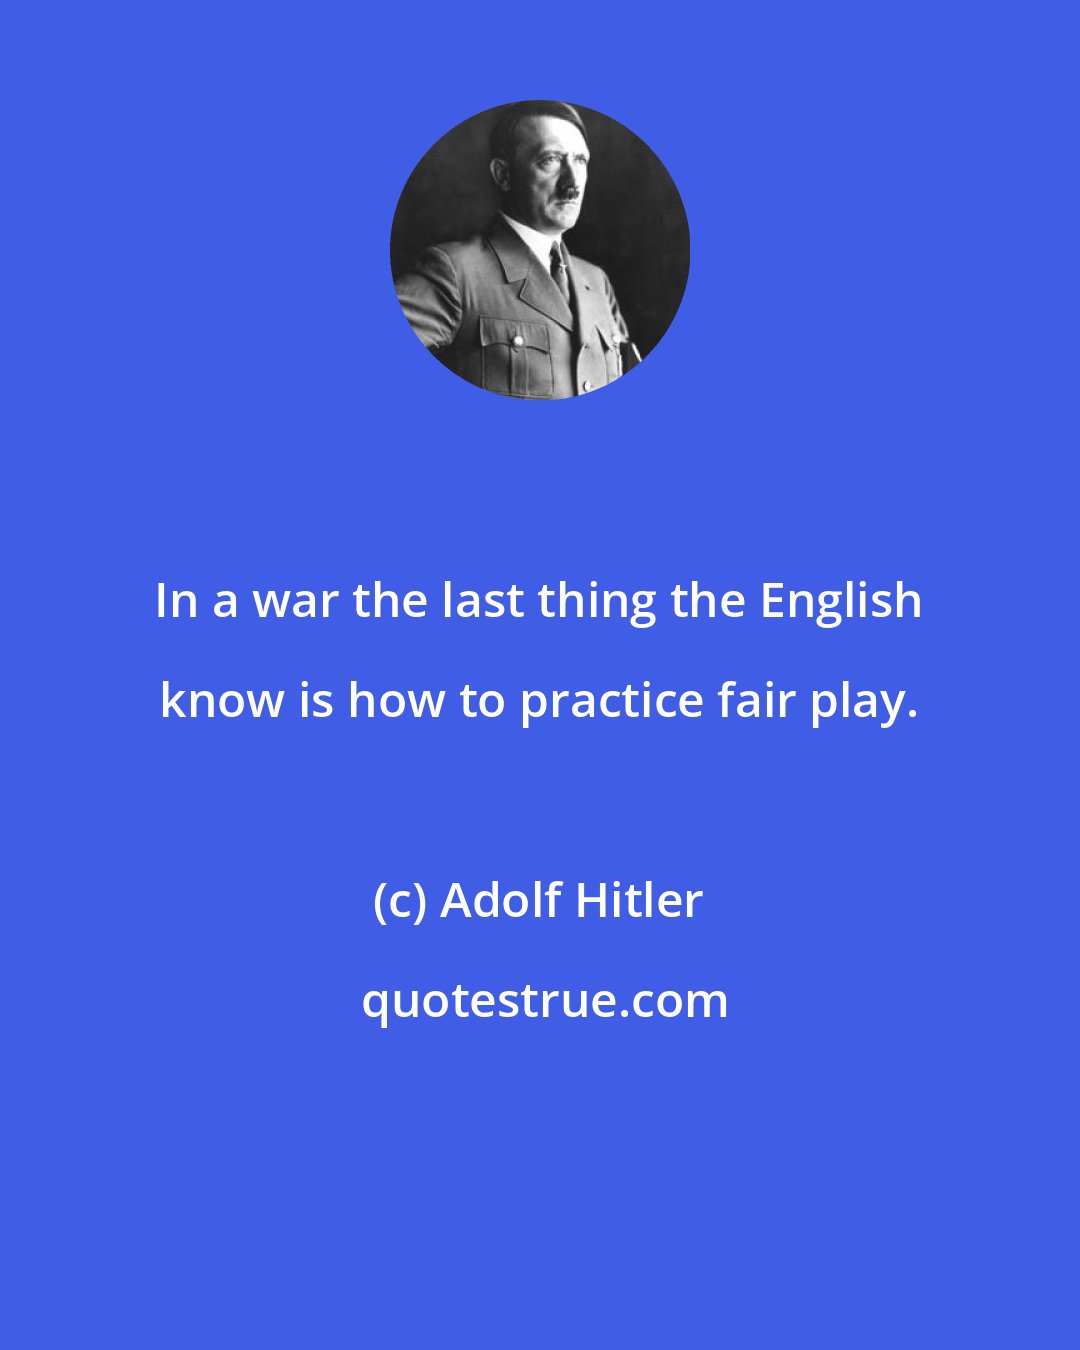 Adolf Hitler: In a war the last thing the English know is how to practice fair play.